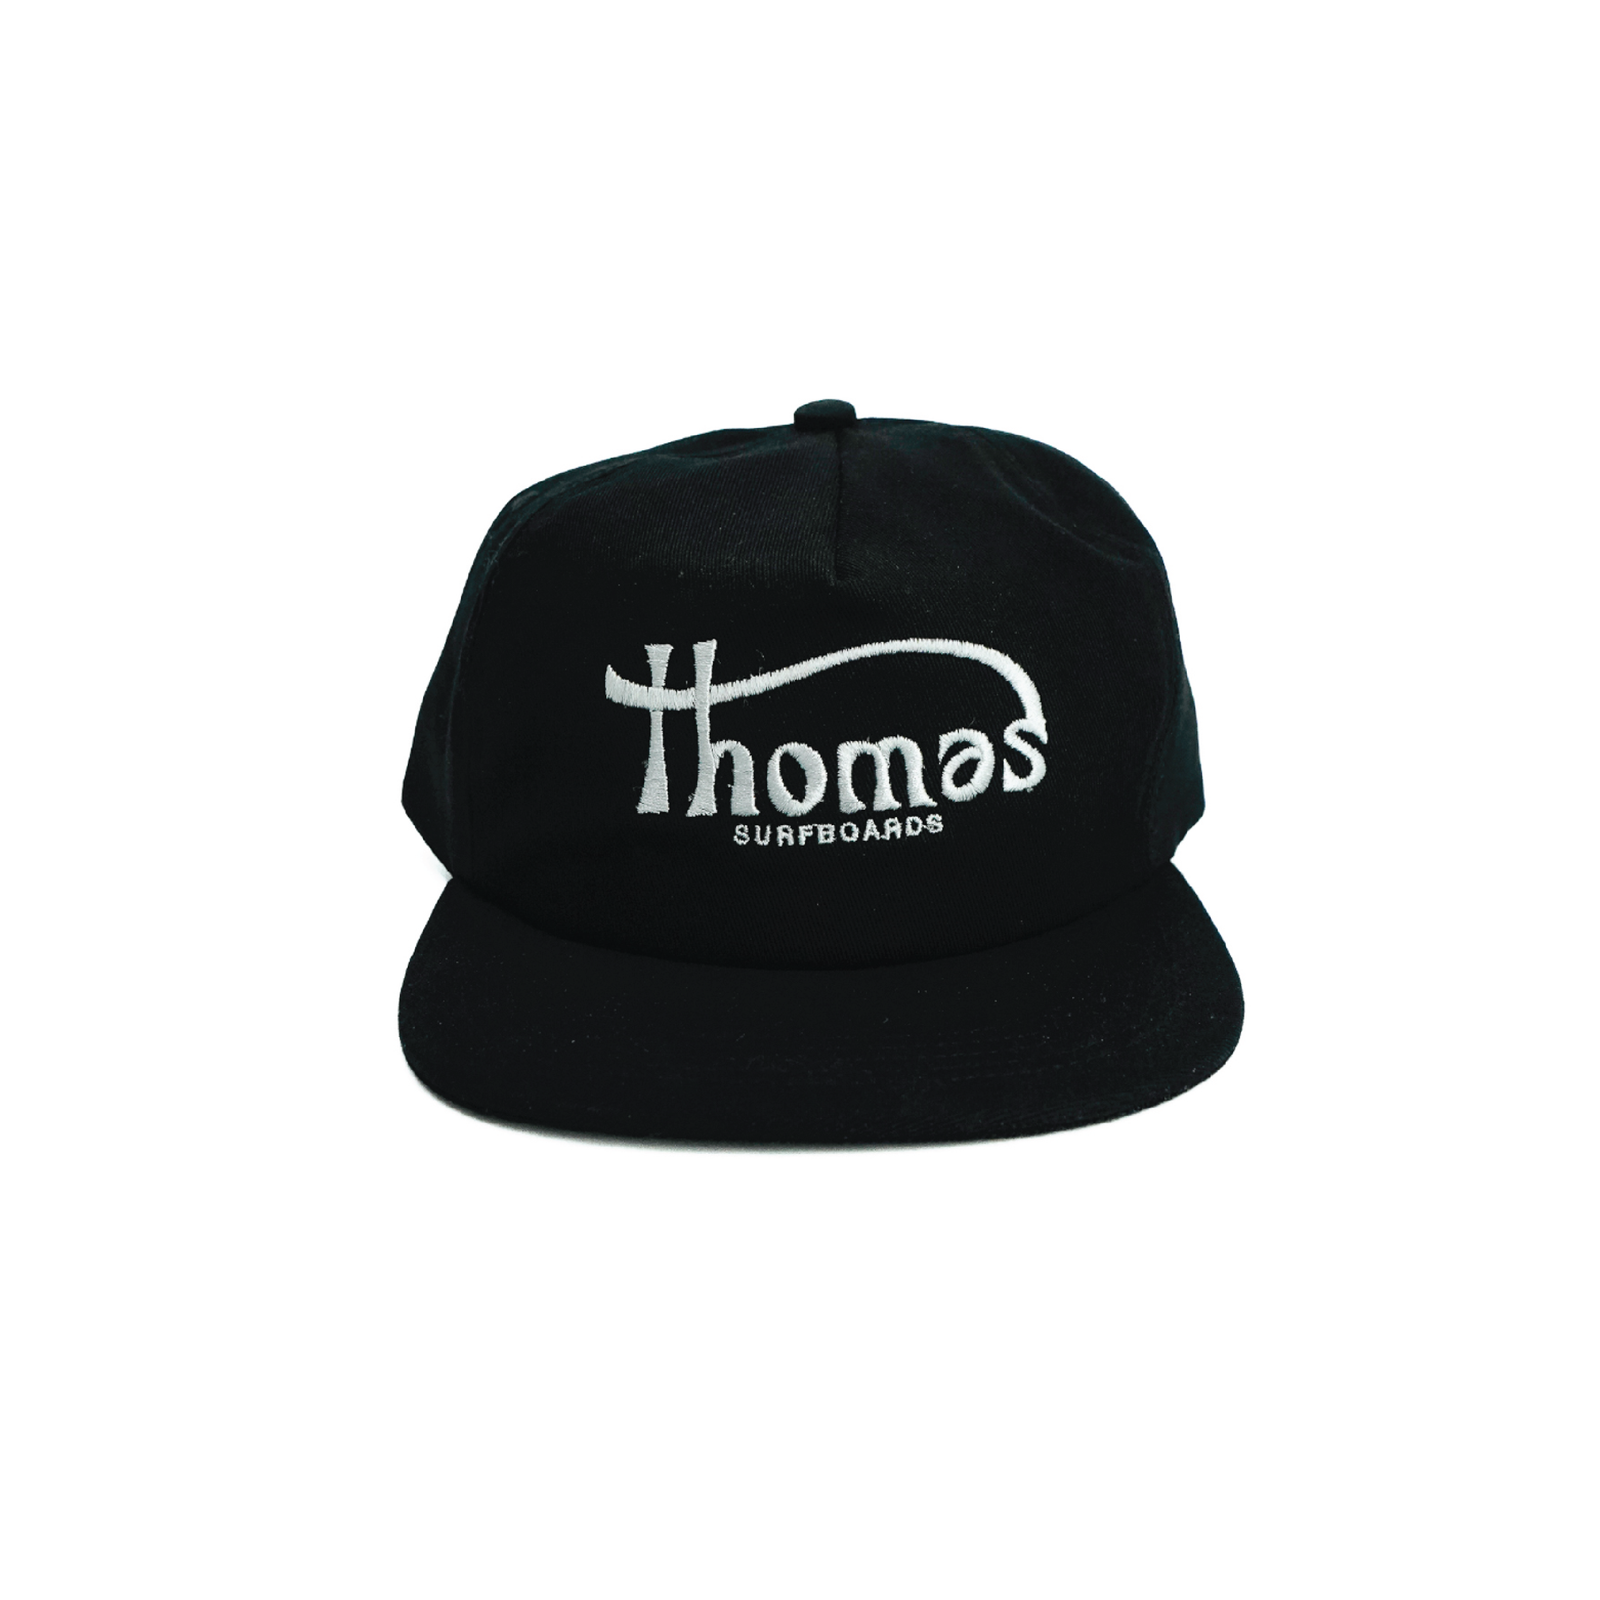 Thomas x McNeil Embroidered Hat Black